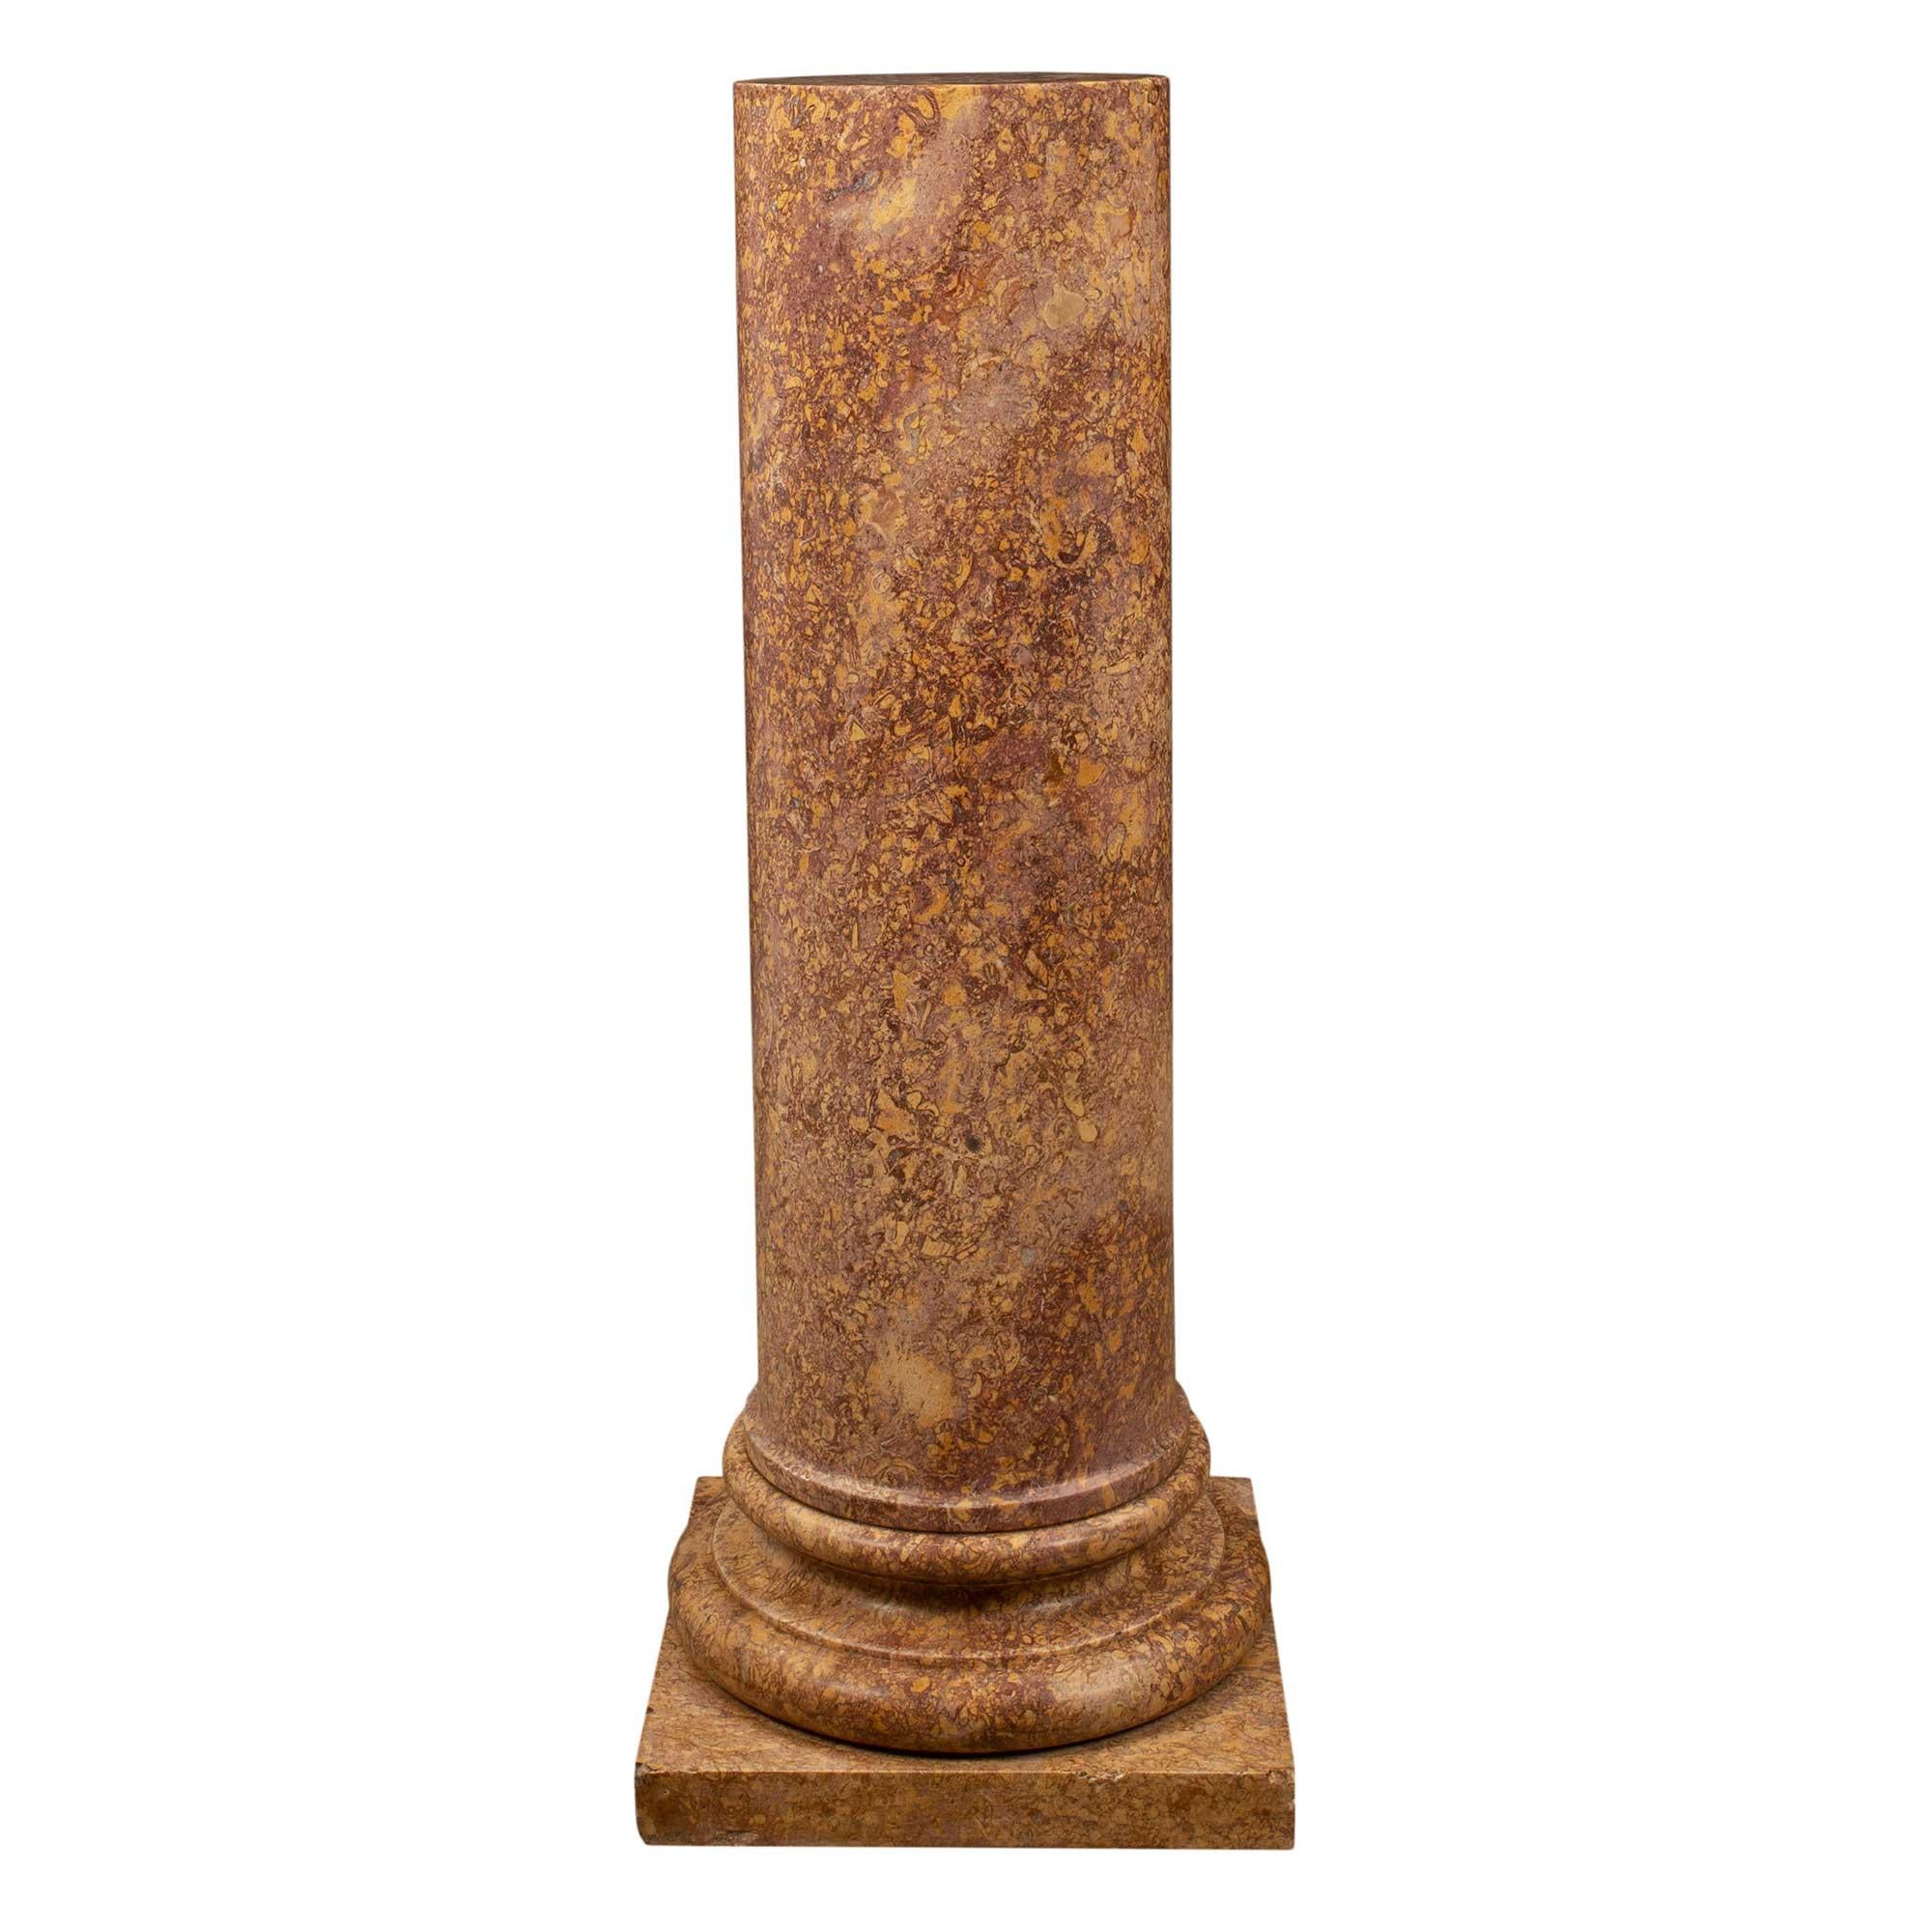 Neoclassical Italian 19th Century Neo-Classical St. Marble Pedestal Columns For Sale